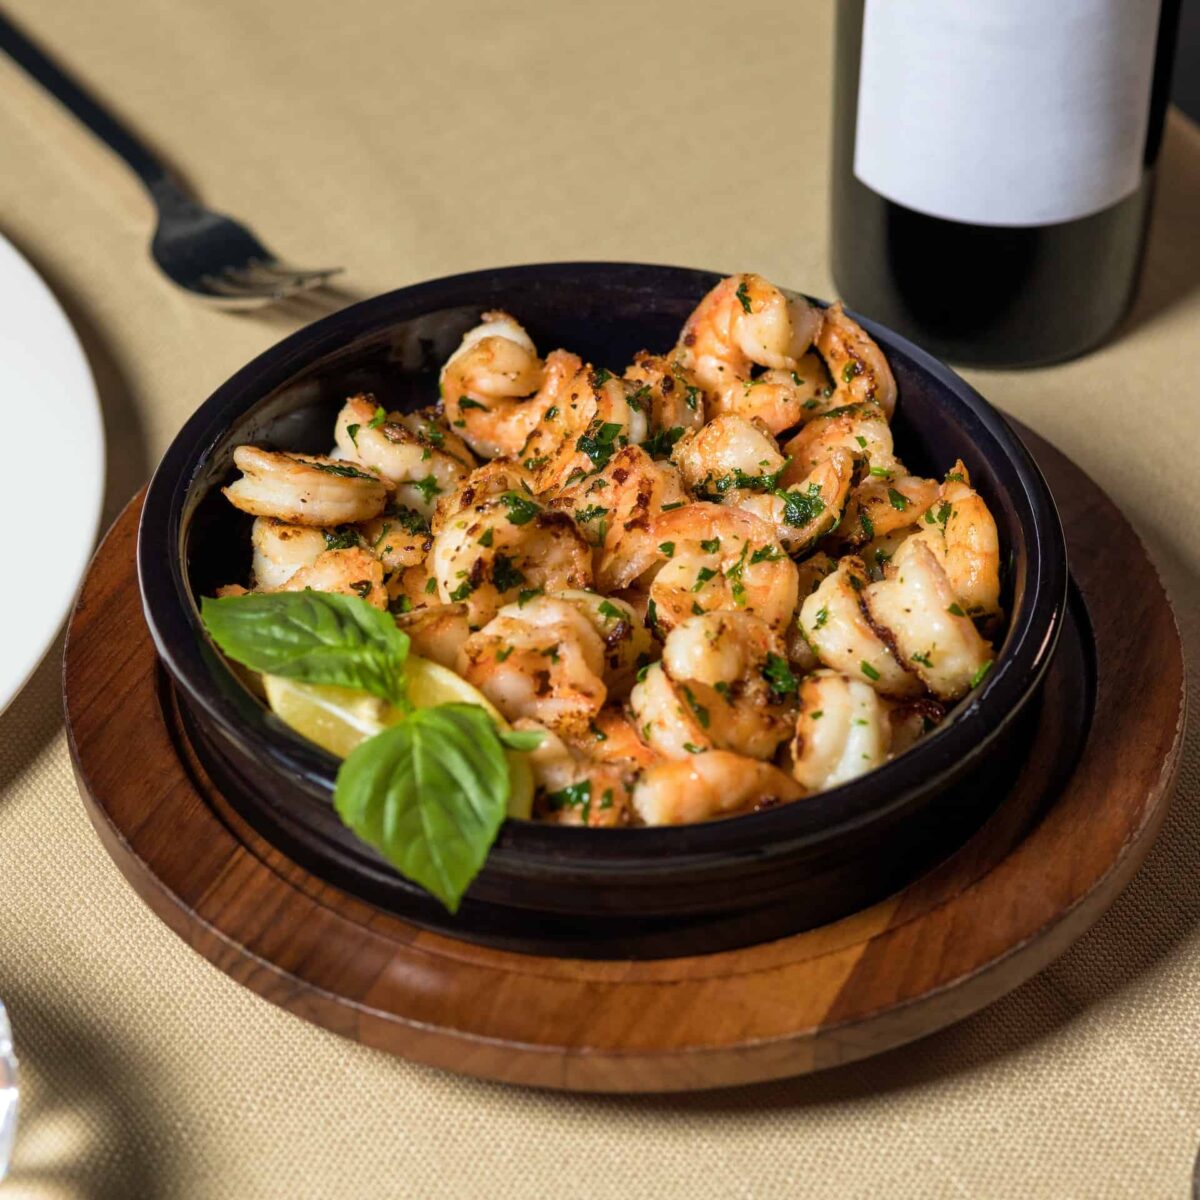 garlic shrimp garnished with basil on a wooden platter with bottle of wine in the background